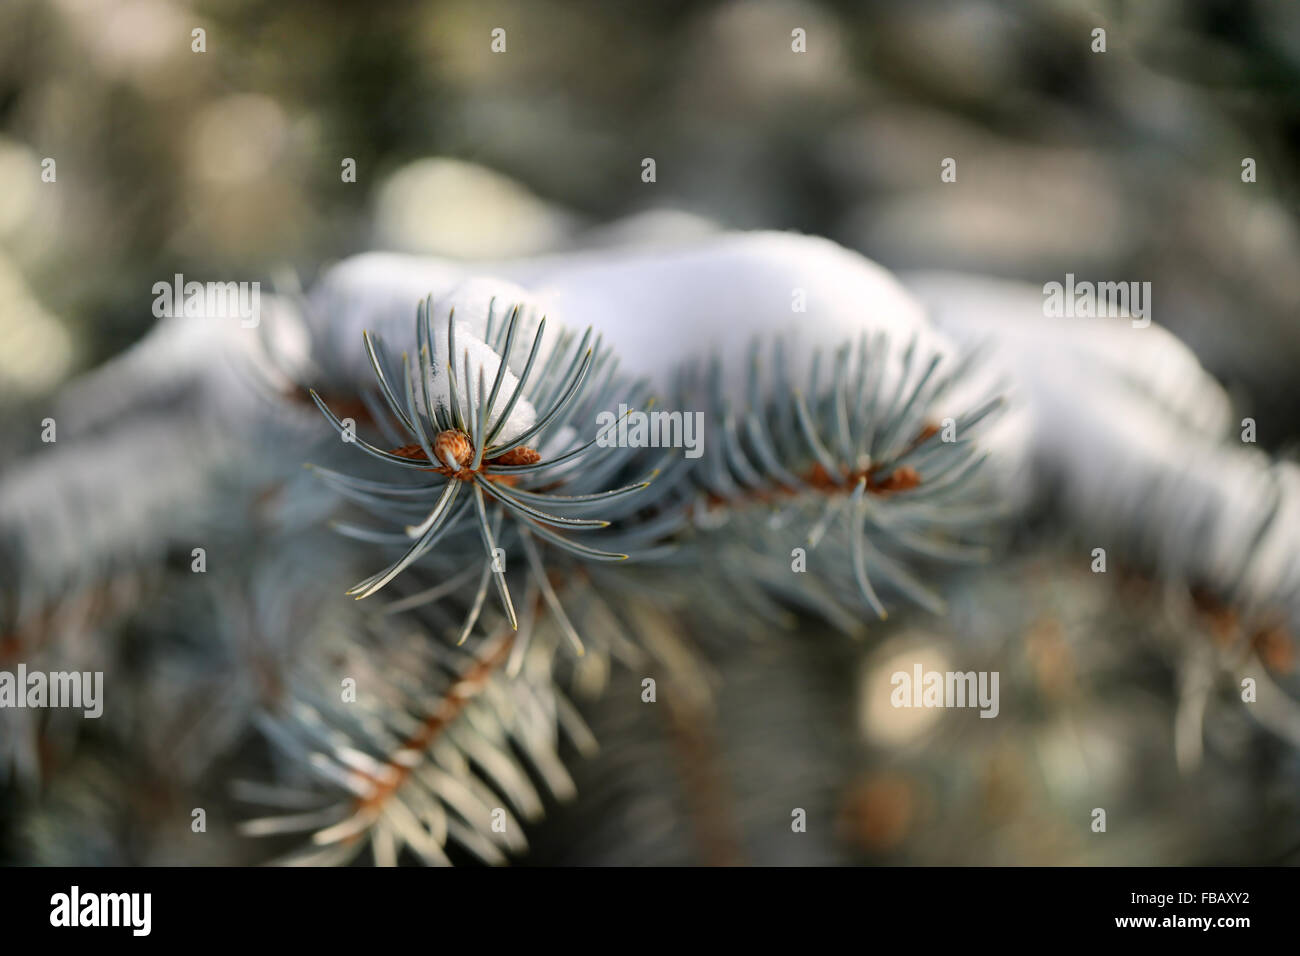 Beautiful needles of spruce tree photographed in the snow closeup Stock Photo